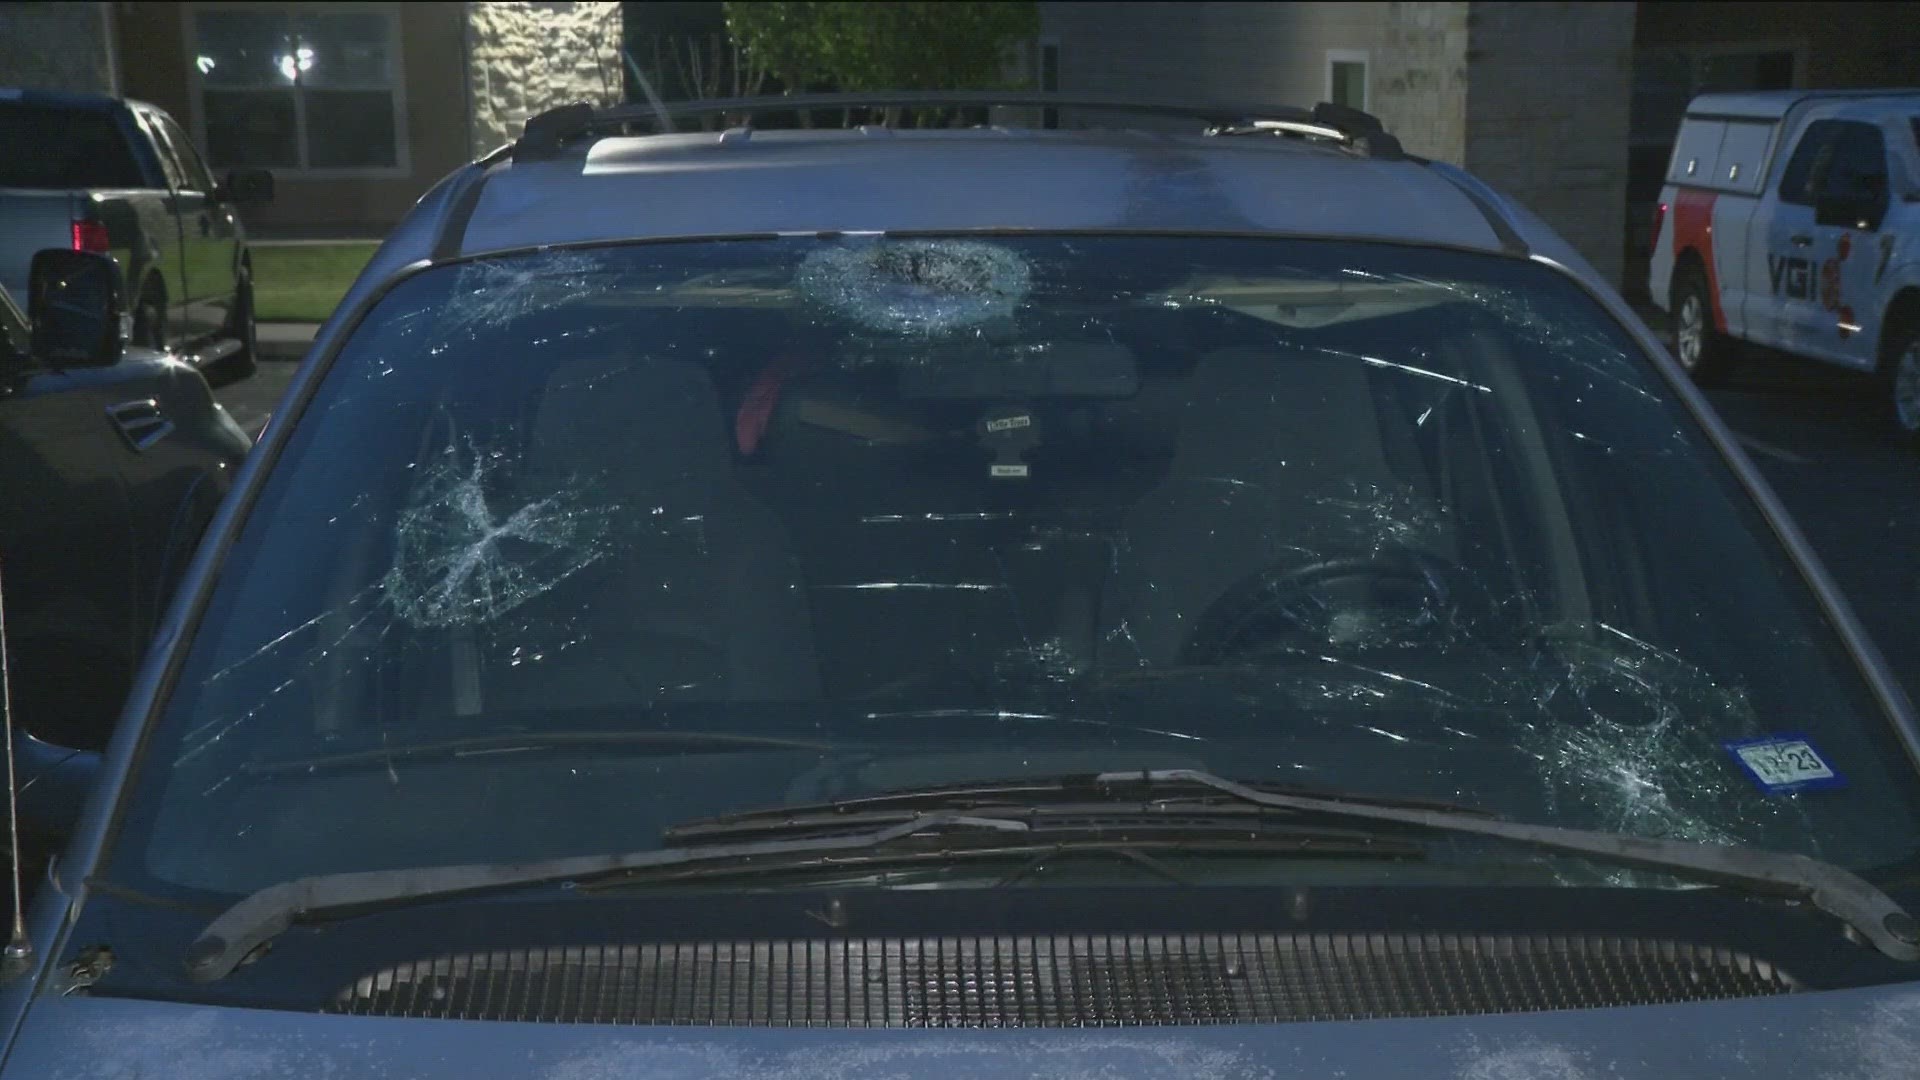 KVUE's Eric Pointer spoke with Marble Falls residents who experienced damage to their vehicles after Tuesday's hailstorm.